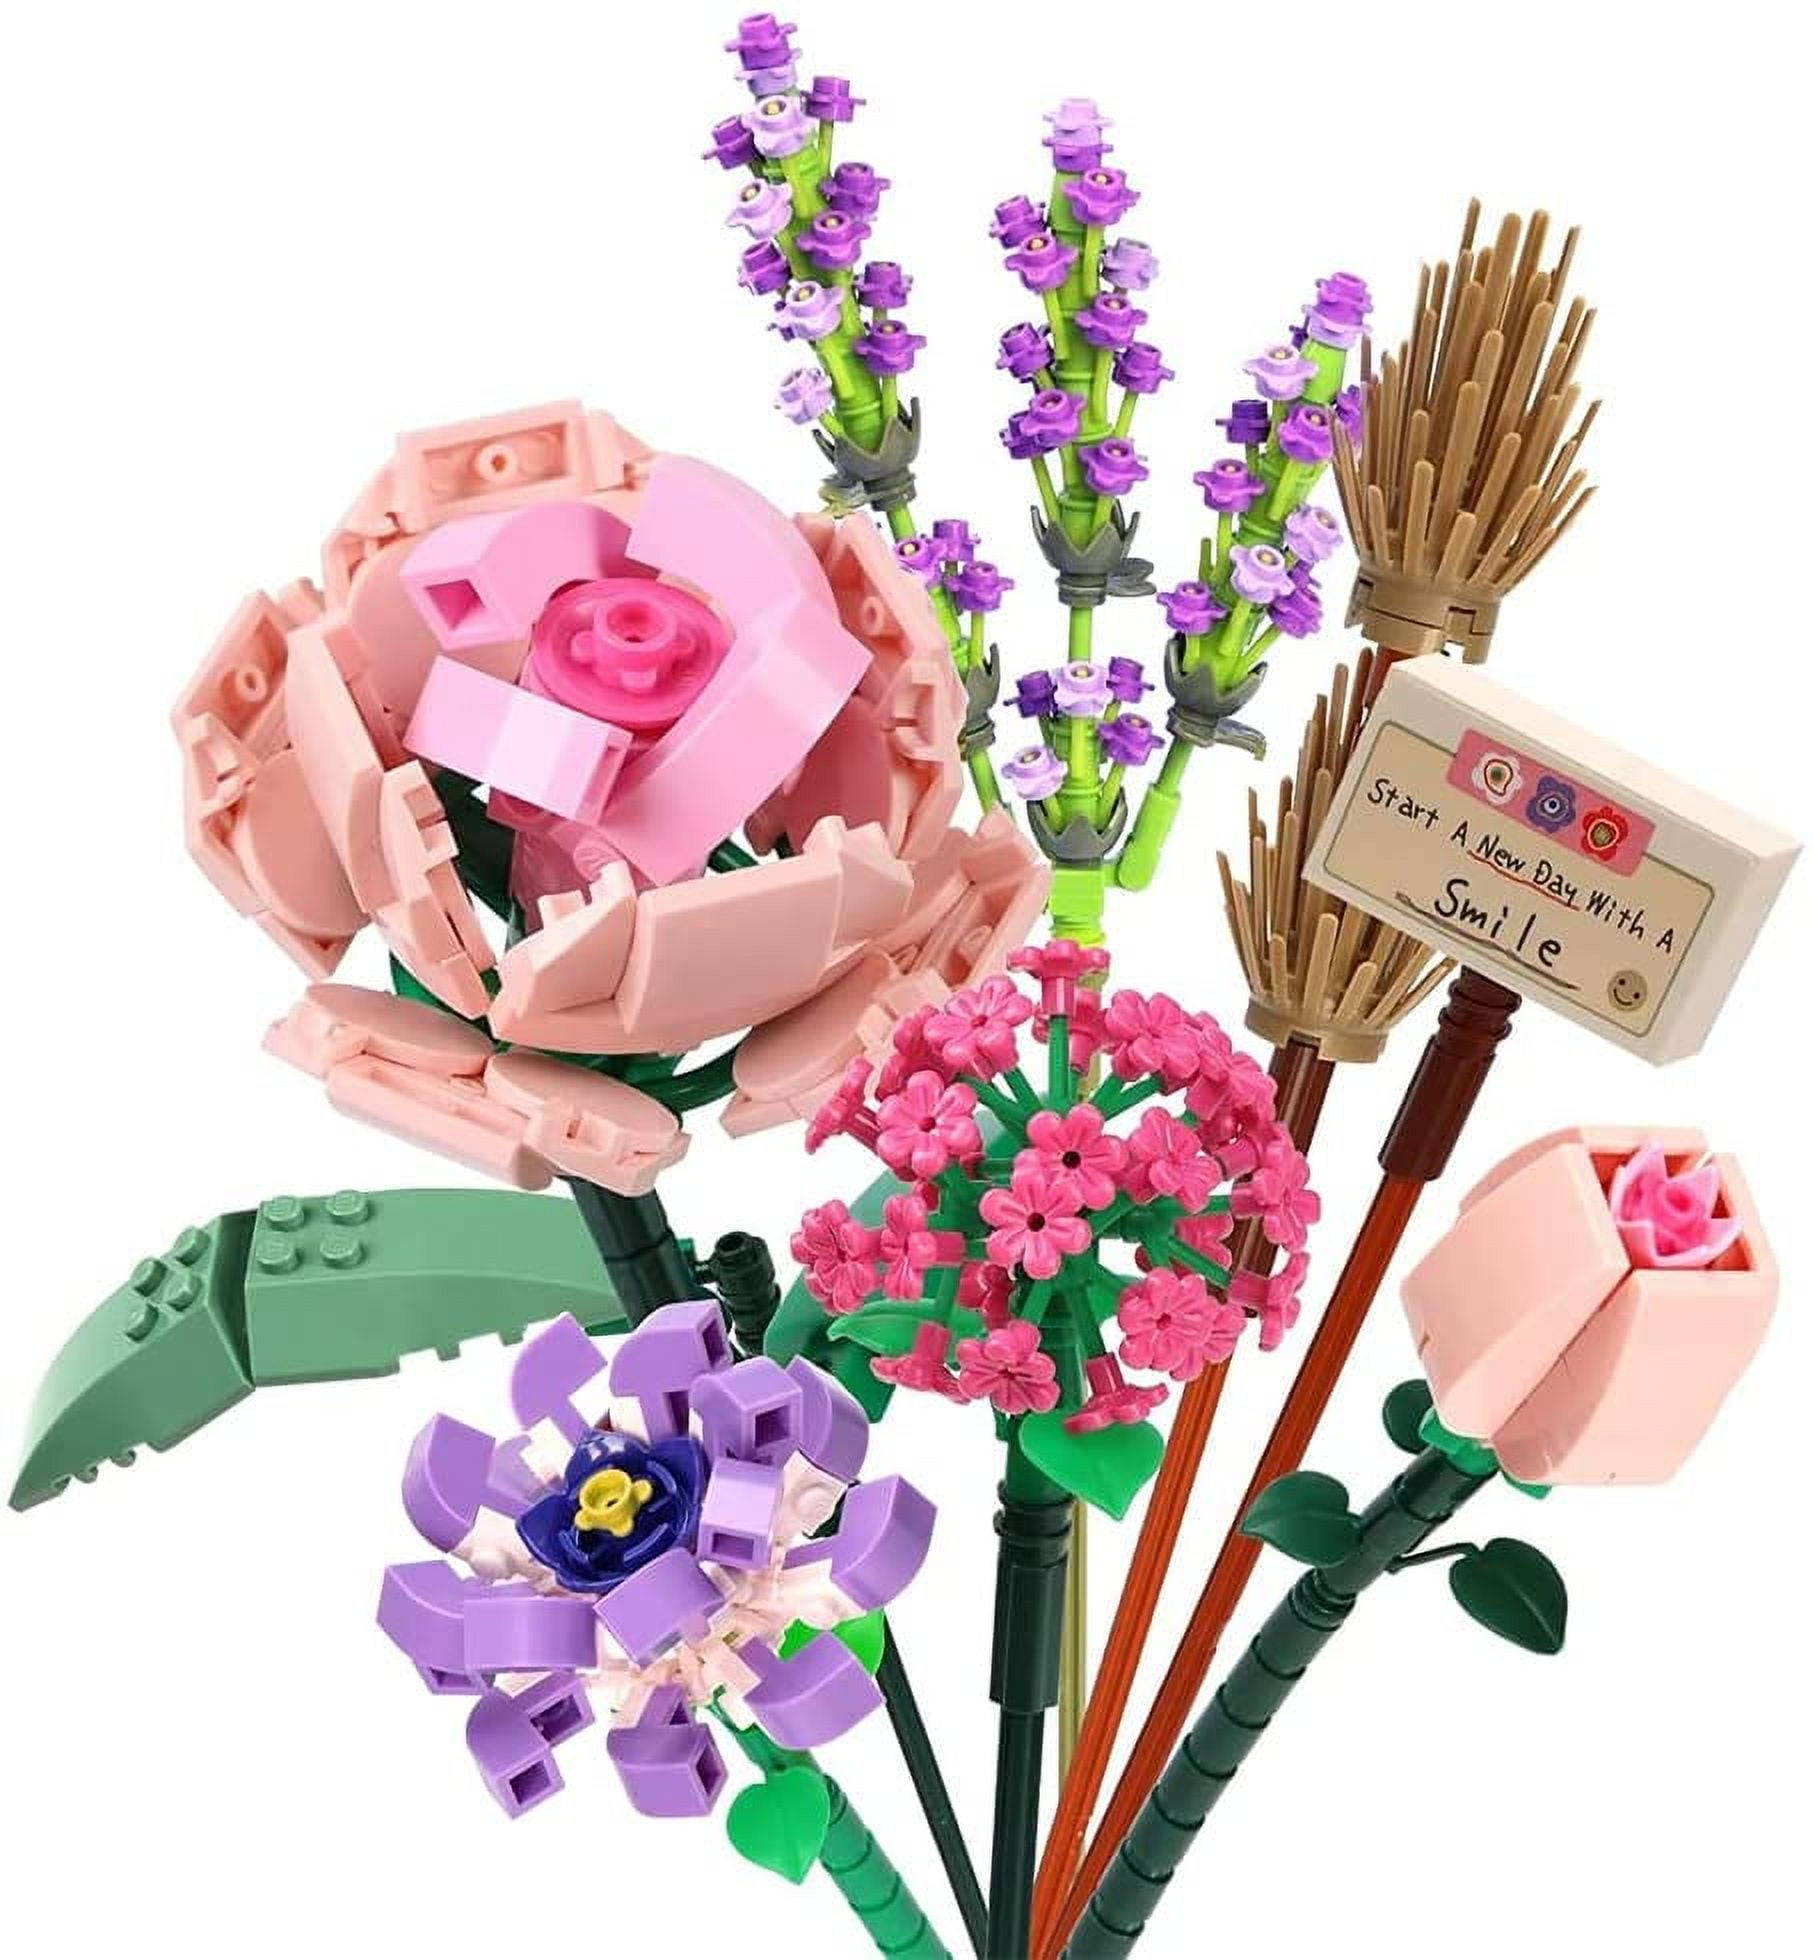 Bouquet Building Kits, Flower Blocks, Artificial Flower Building Toys, Creative Projects for Adults, Plants Collection Compatible Lego 547 Pieces (